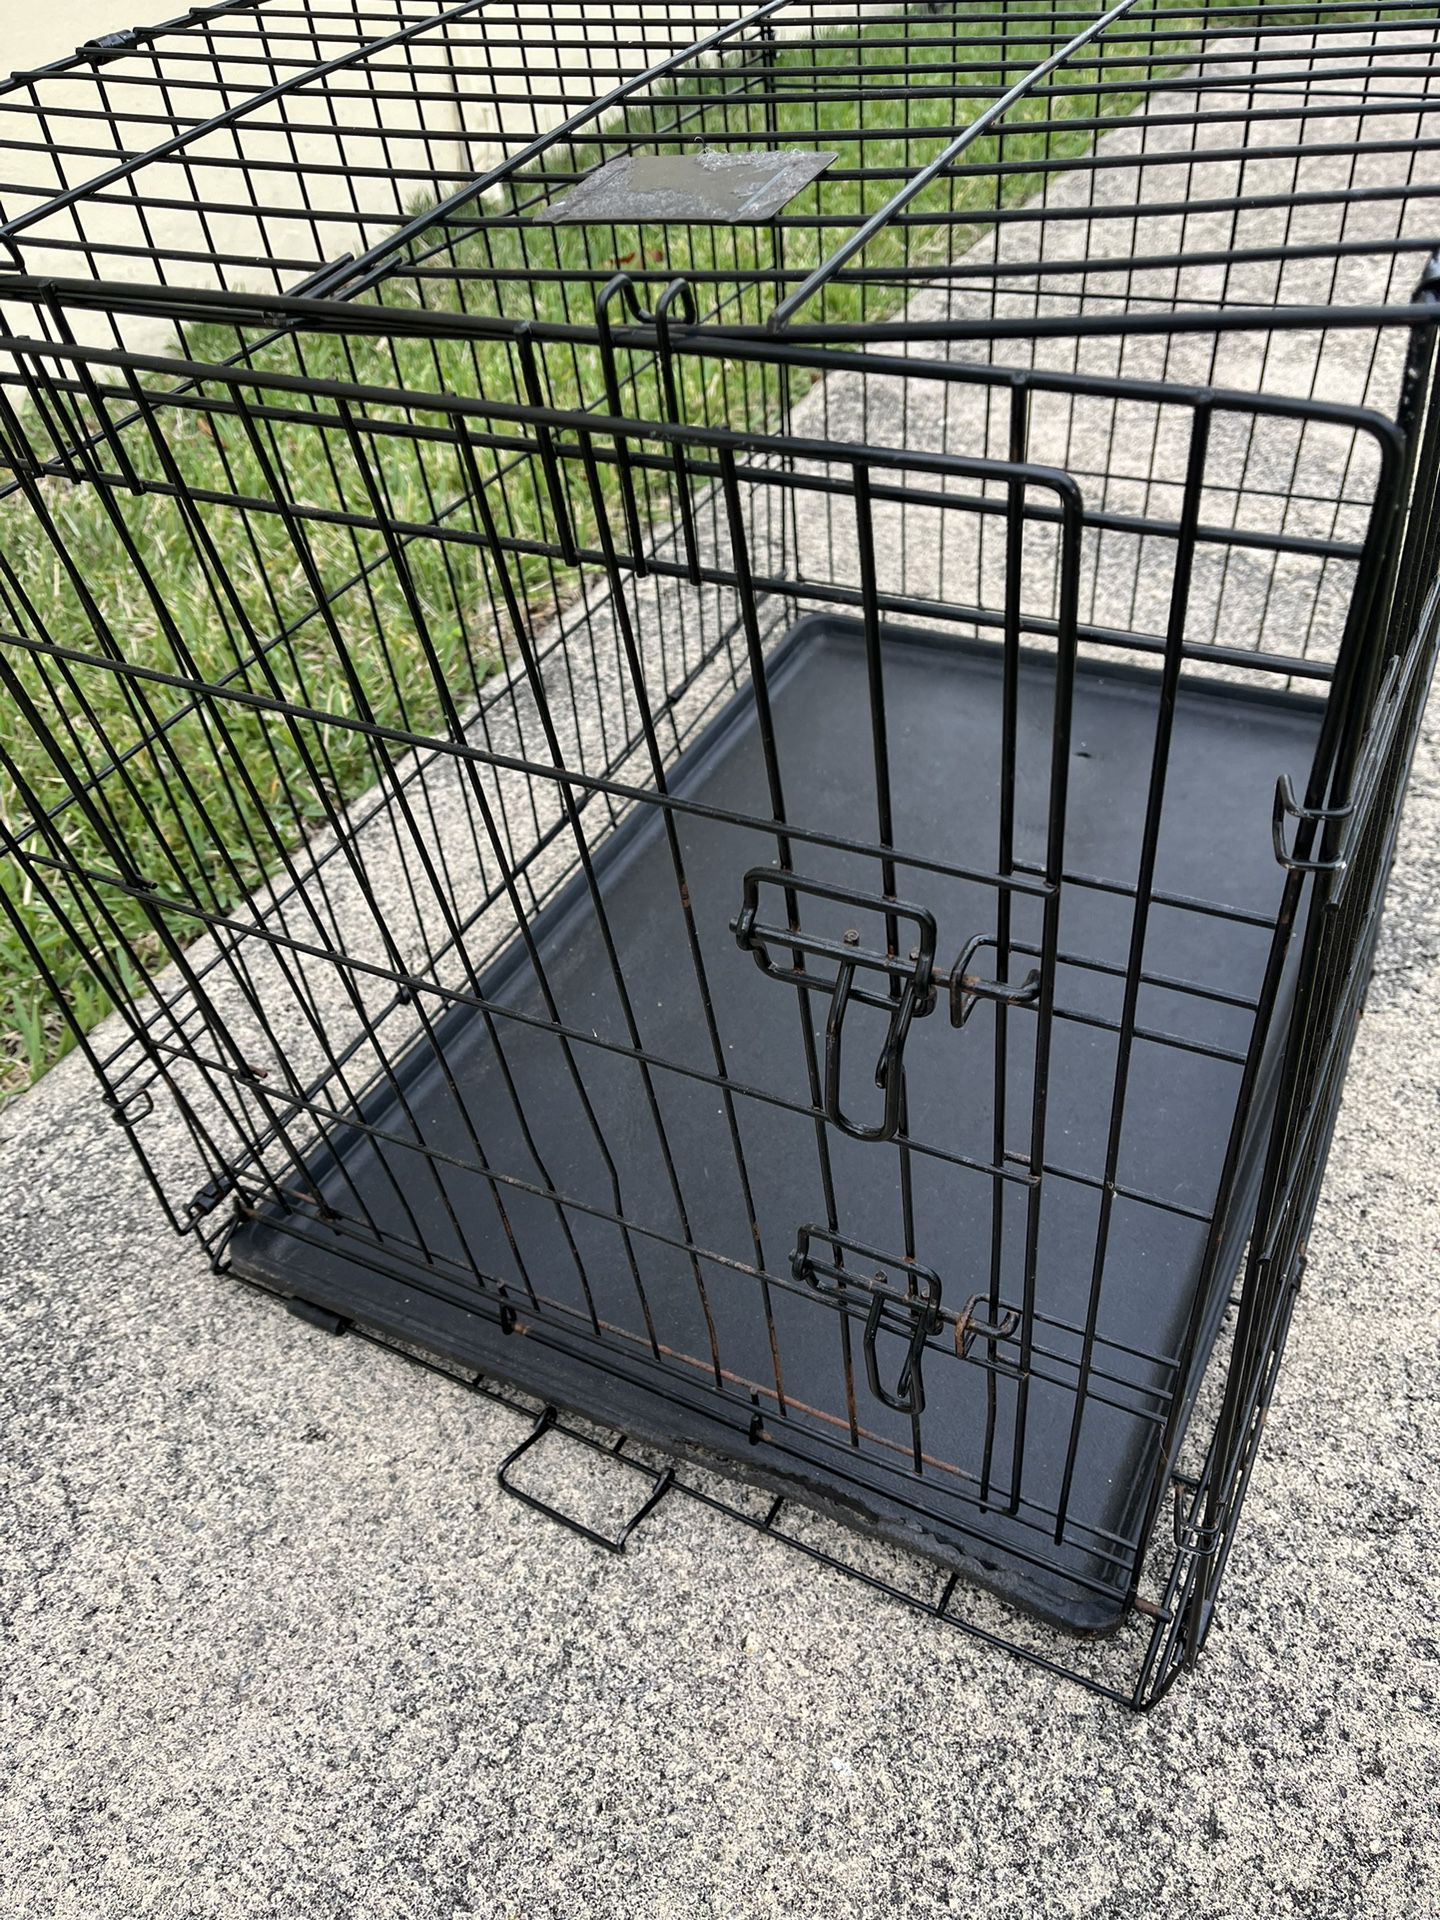 Dog Cage / Kendall Area